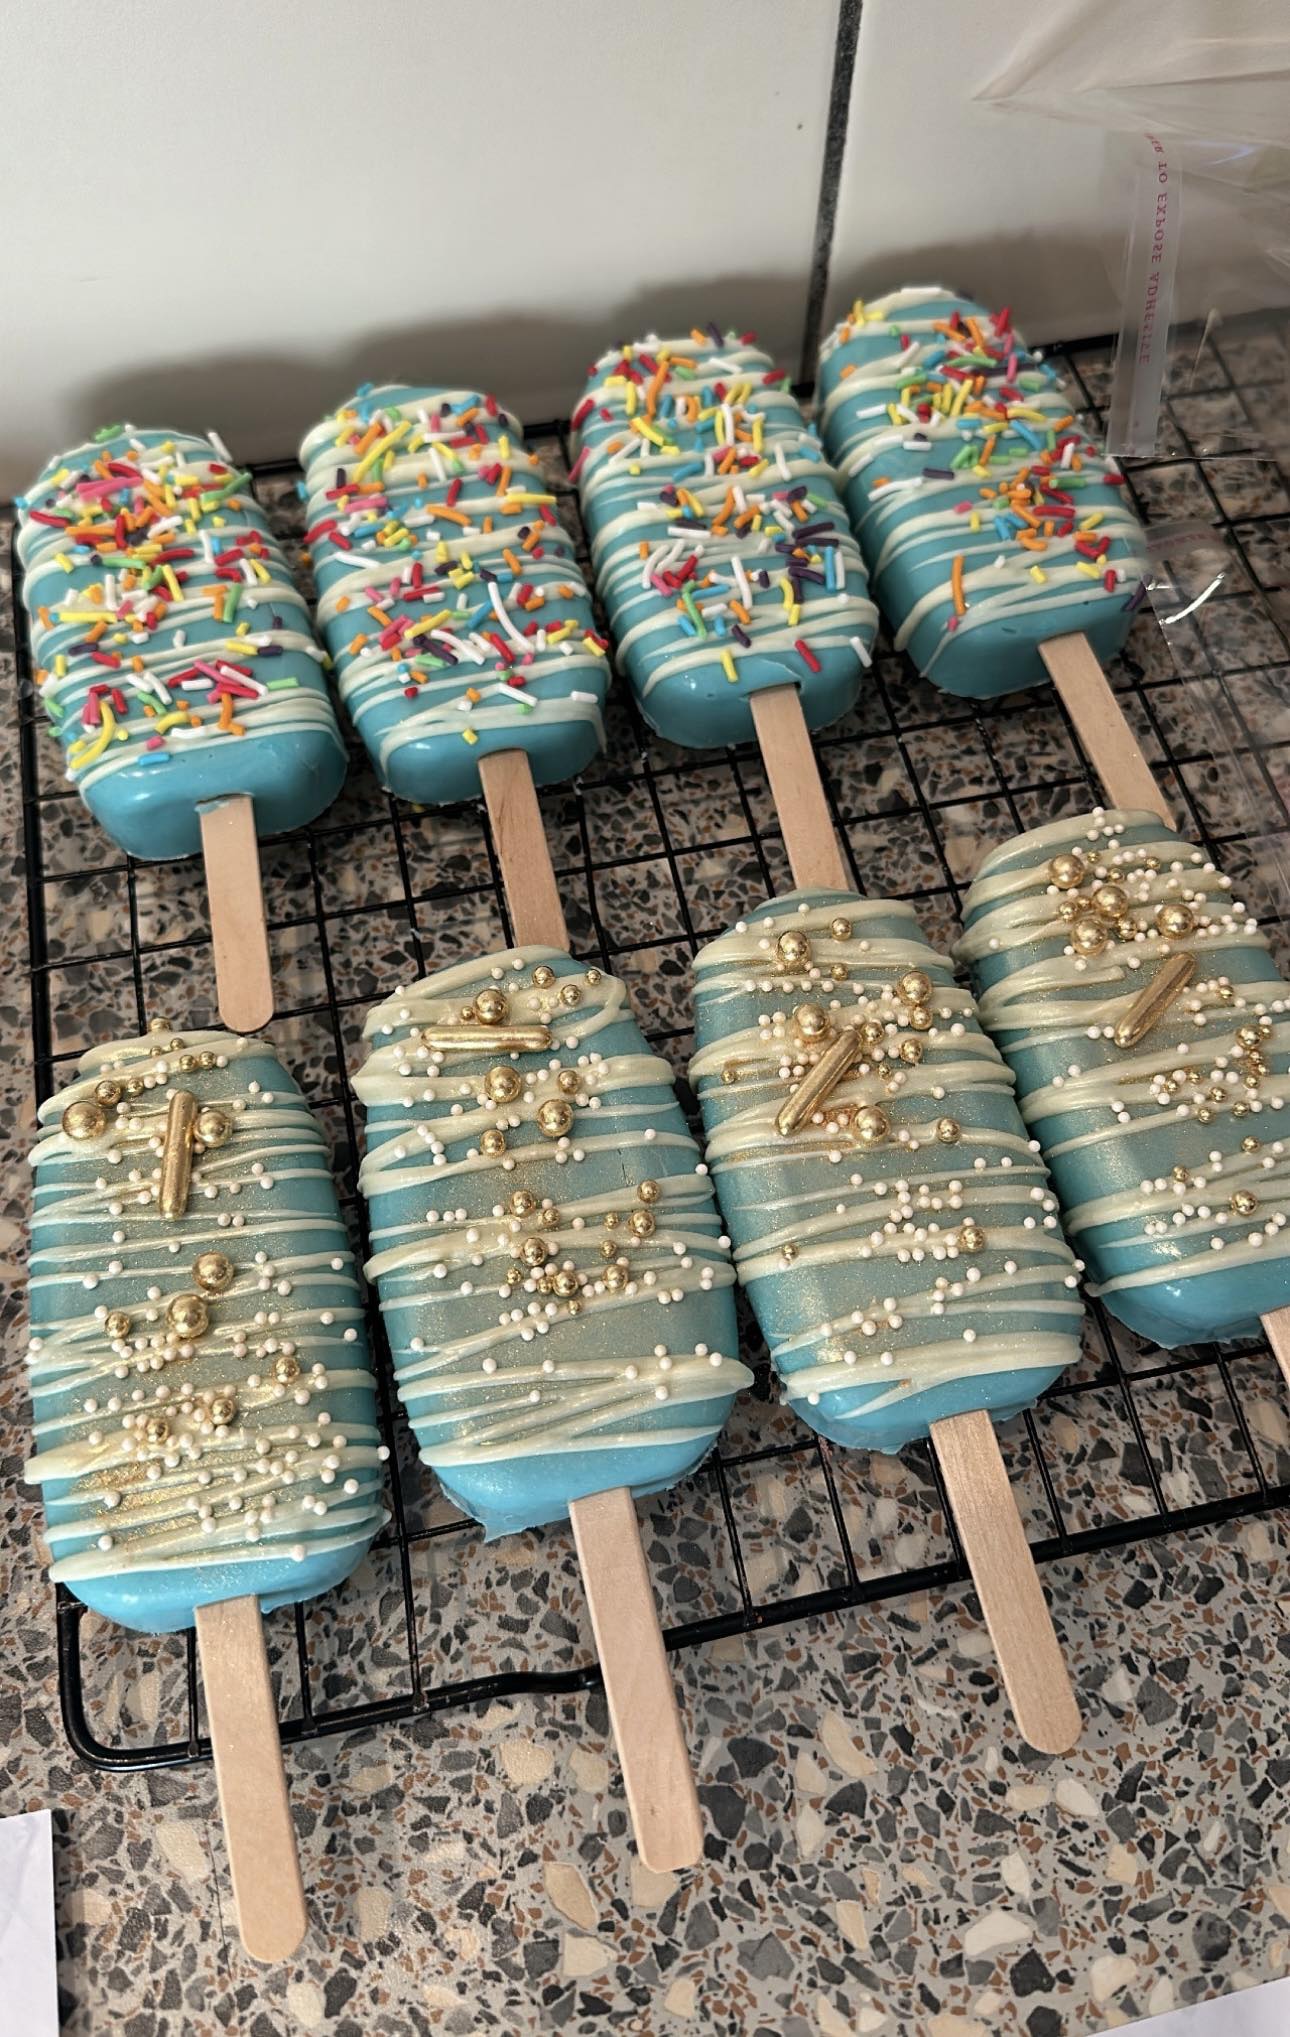 How To Make Cakesicles - Sweets & Treats Blog